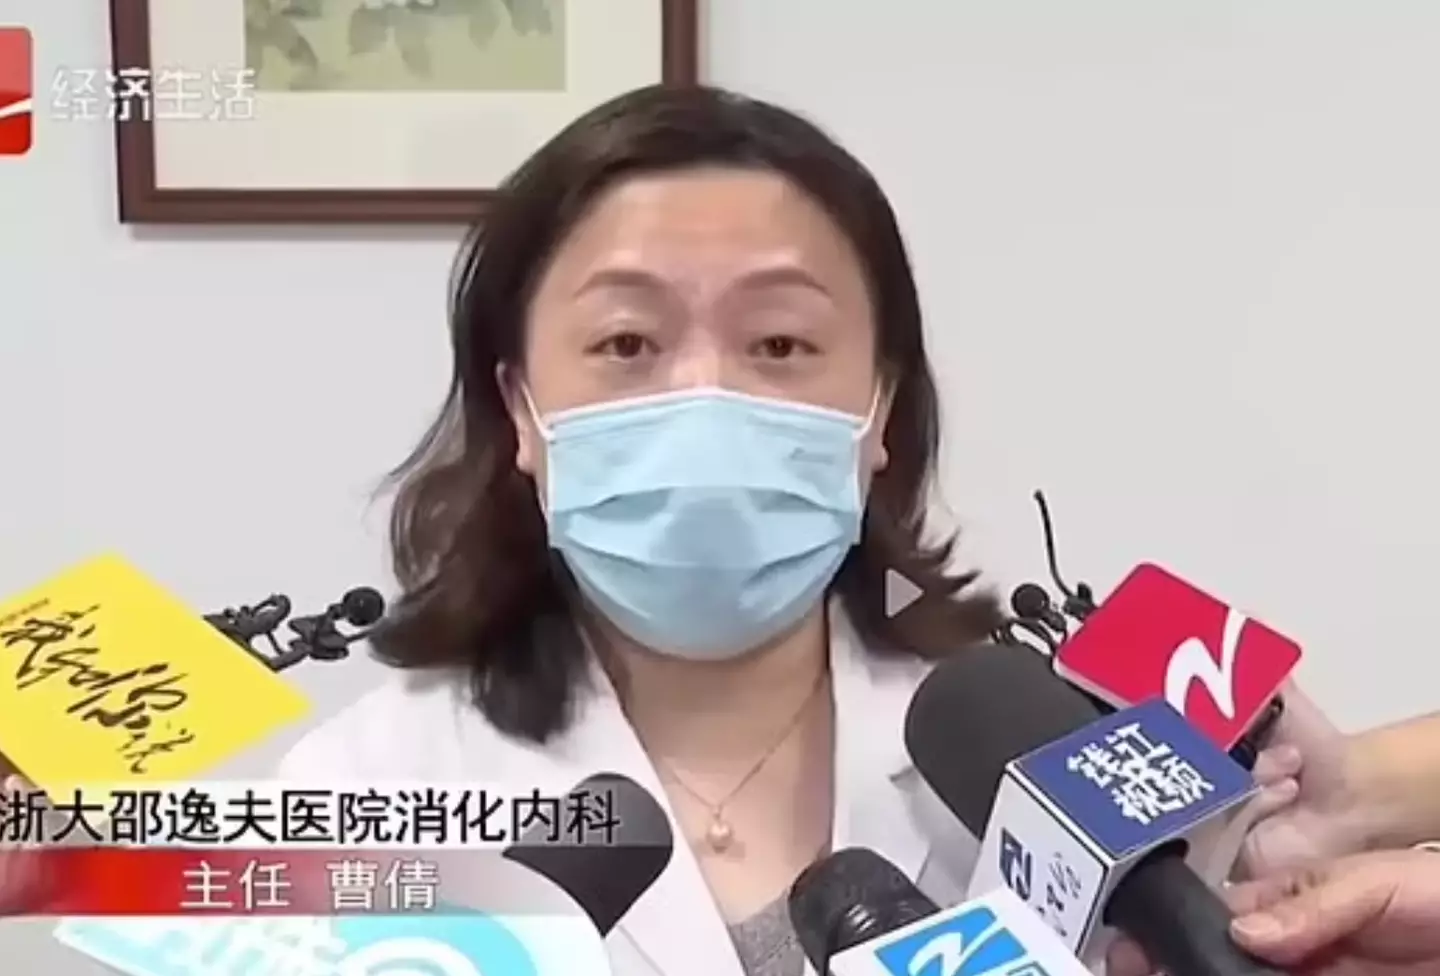 According to Dr Cao Qian, Lu didn't admit what he had eaten at first, only telling doctors after his wife reminded him.